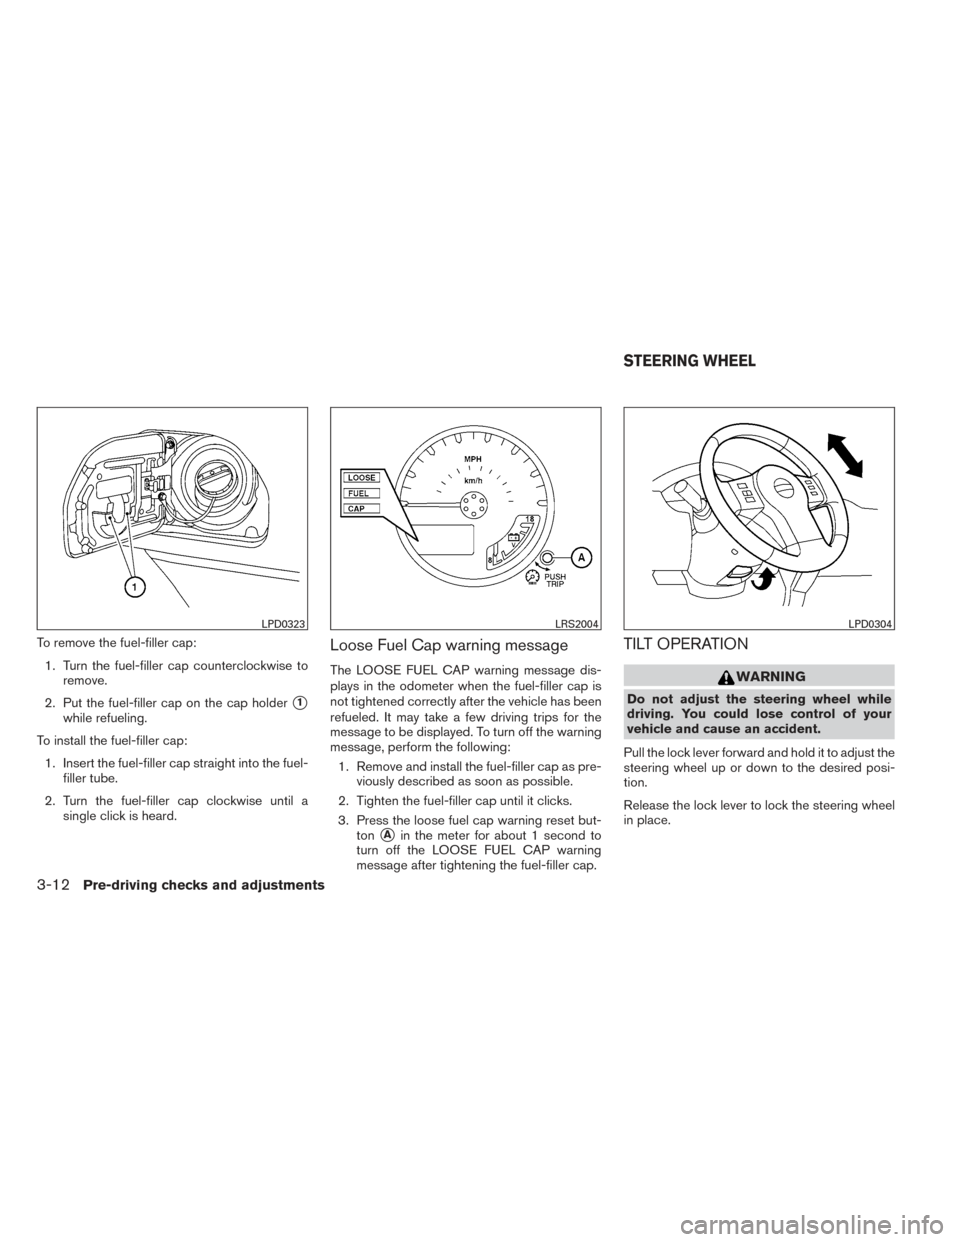 NISSAN XTERRA 2014 N50 / 2.G Owners Manual To remove the fuel-filler cap:1. Turn the fuel-filler cap counterclockwise to remove.
2. Put the fuel-filler cap on the cap holder
1
while refueling.
To install the fuel-filler cap: 1. Insert the fue